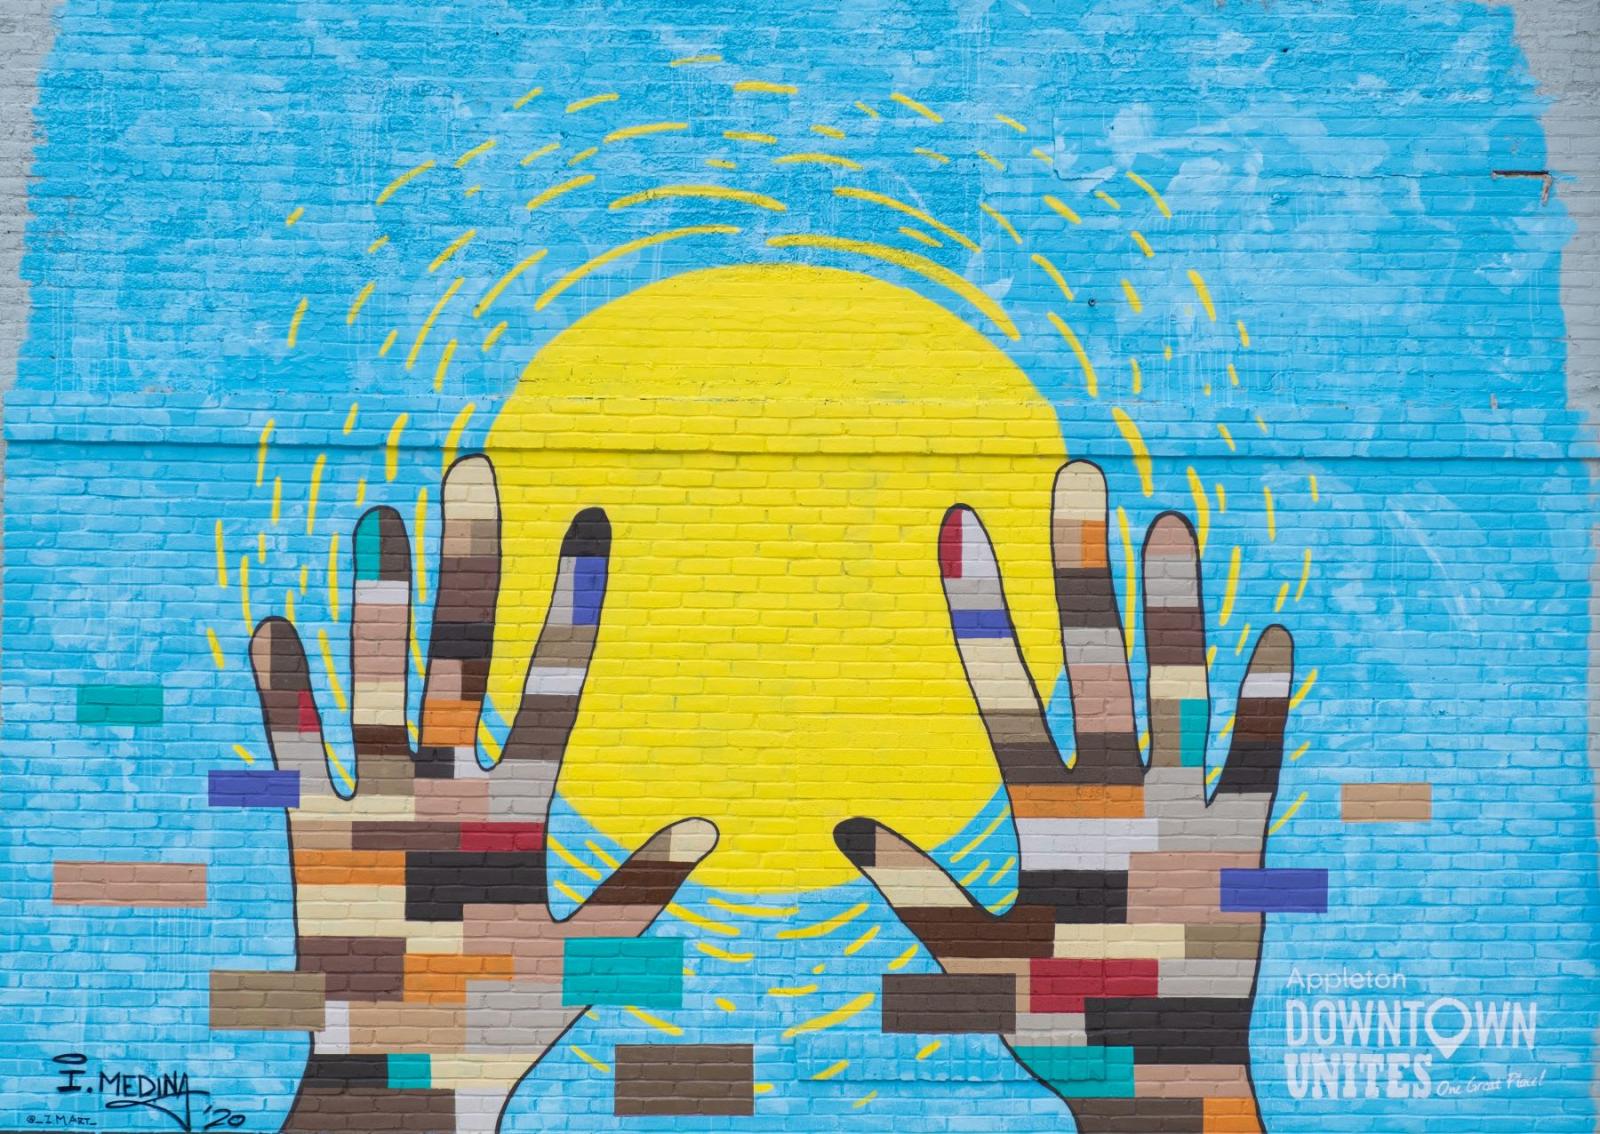 mural of the sun with hands covered in different shades of skin tones and flag colors